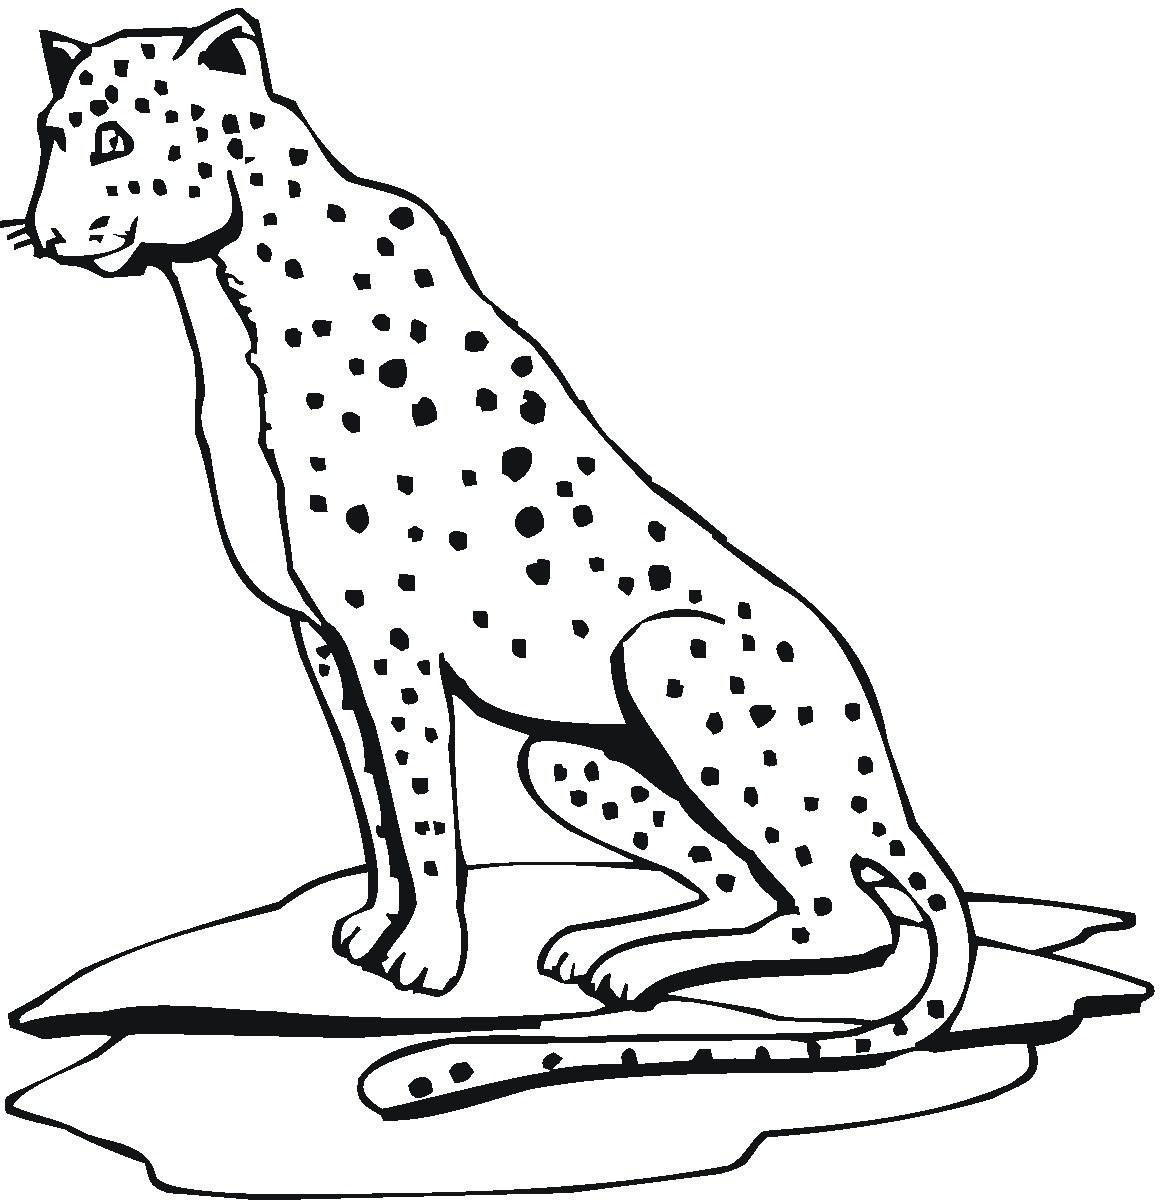 Easy How to Draw a Cheetah Tutorial and Cheetah Coloring Page